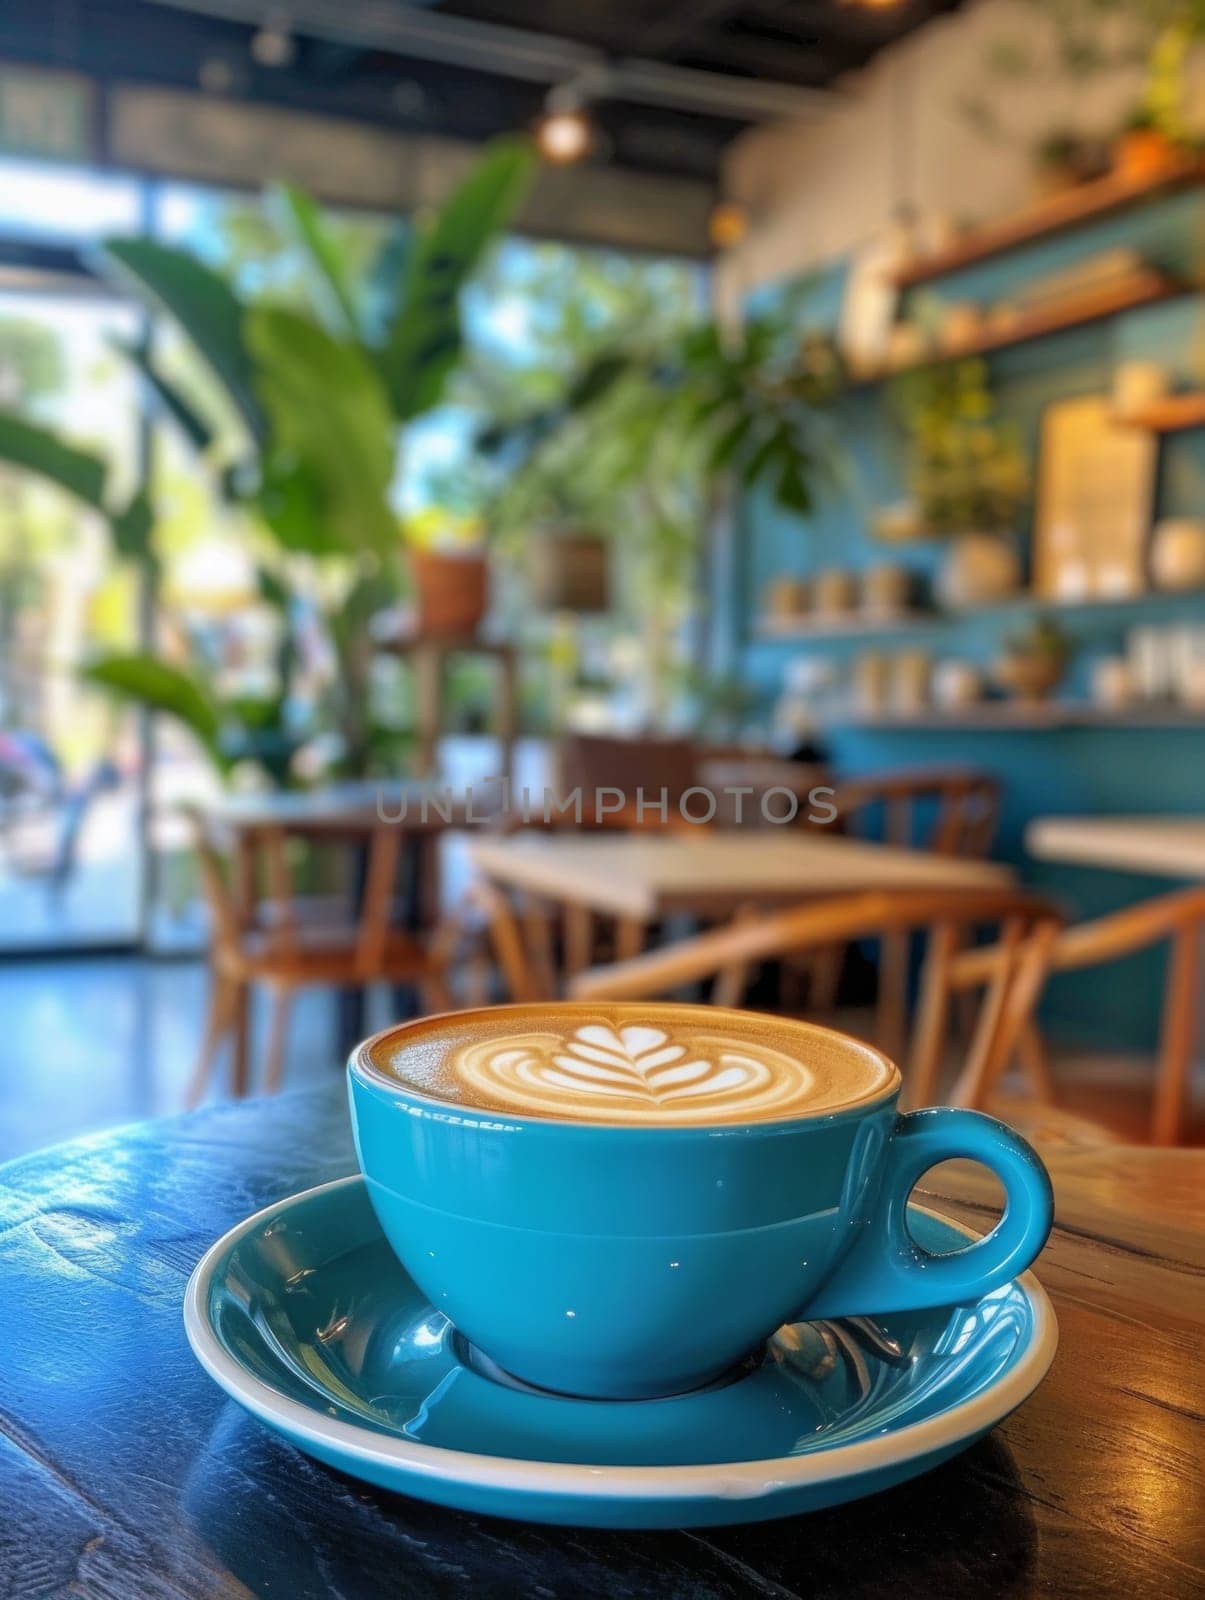 Cup of coffee in a blue cup with latte art in a beautiful cafe background in the morning with sunlight.